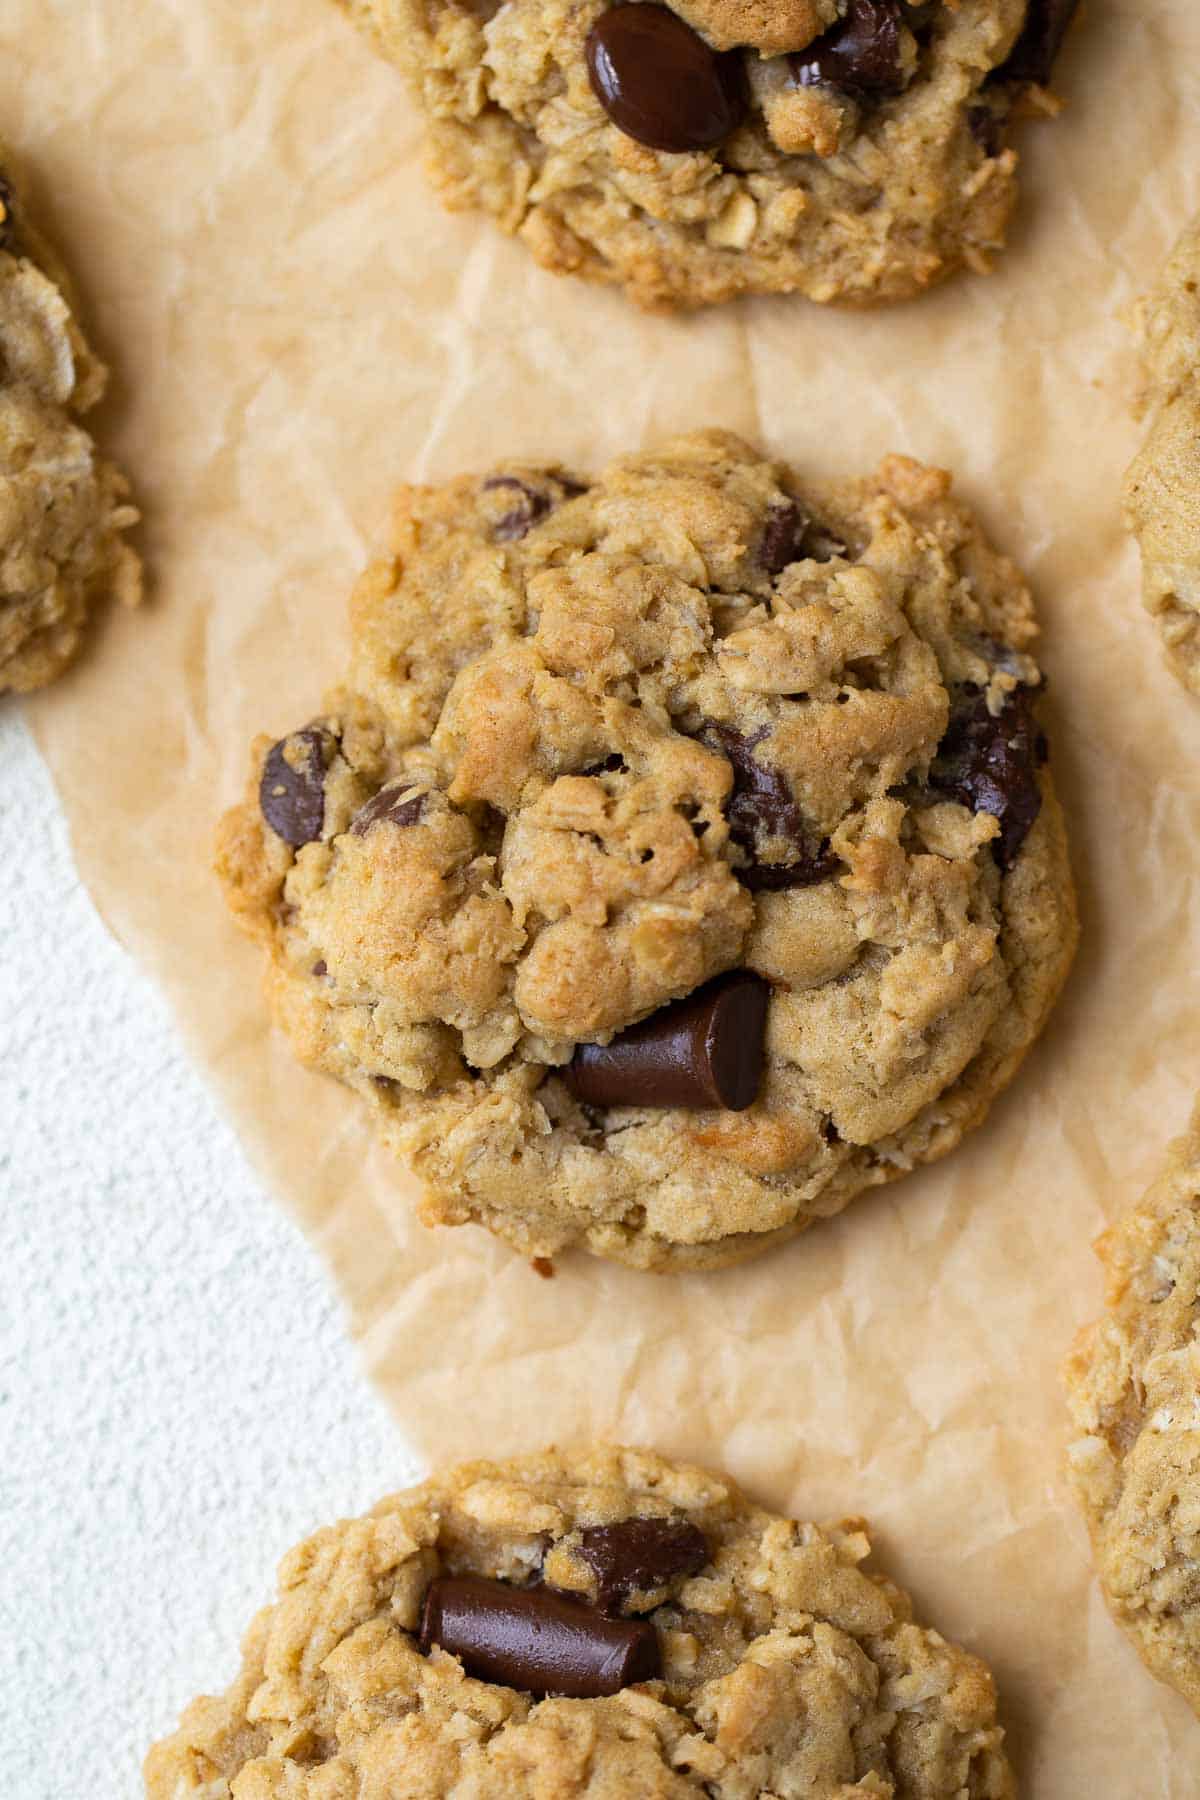 The Best Gluten Free Oatmeal Chocolate Chip Cookies Meaningful Eats,Cardamom Spice Powder